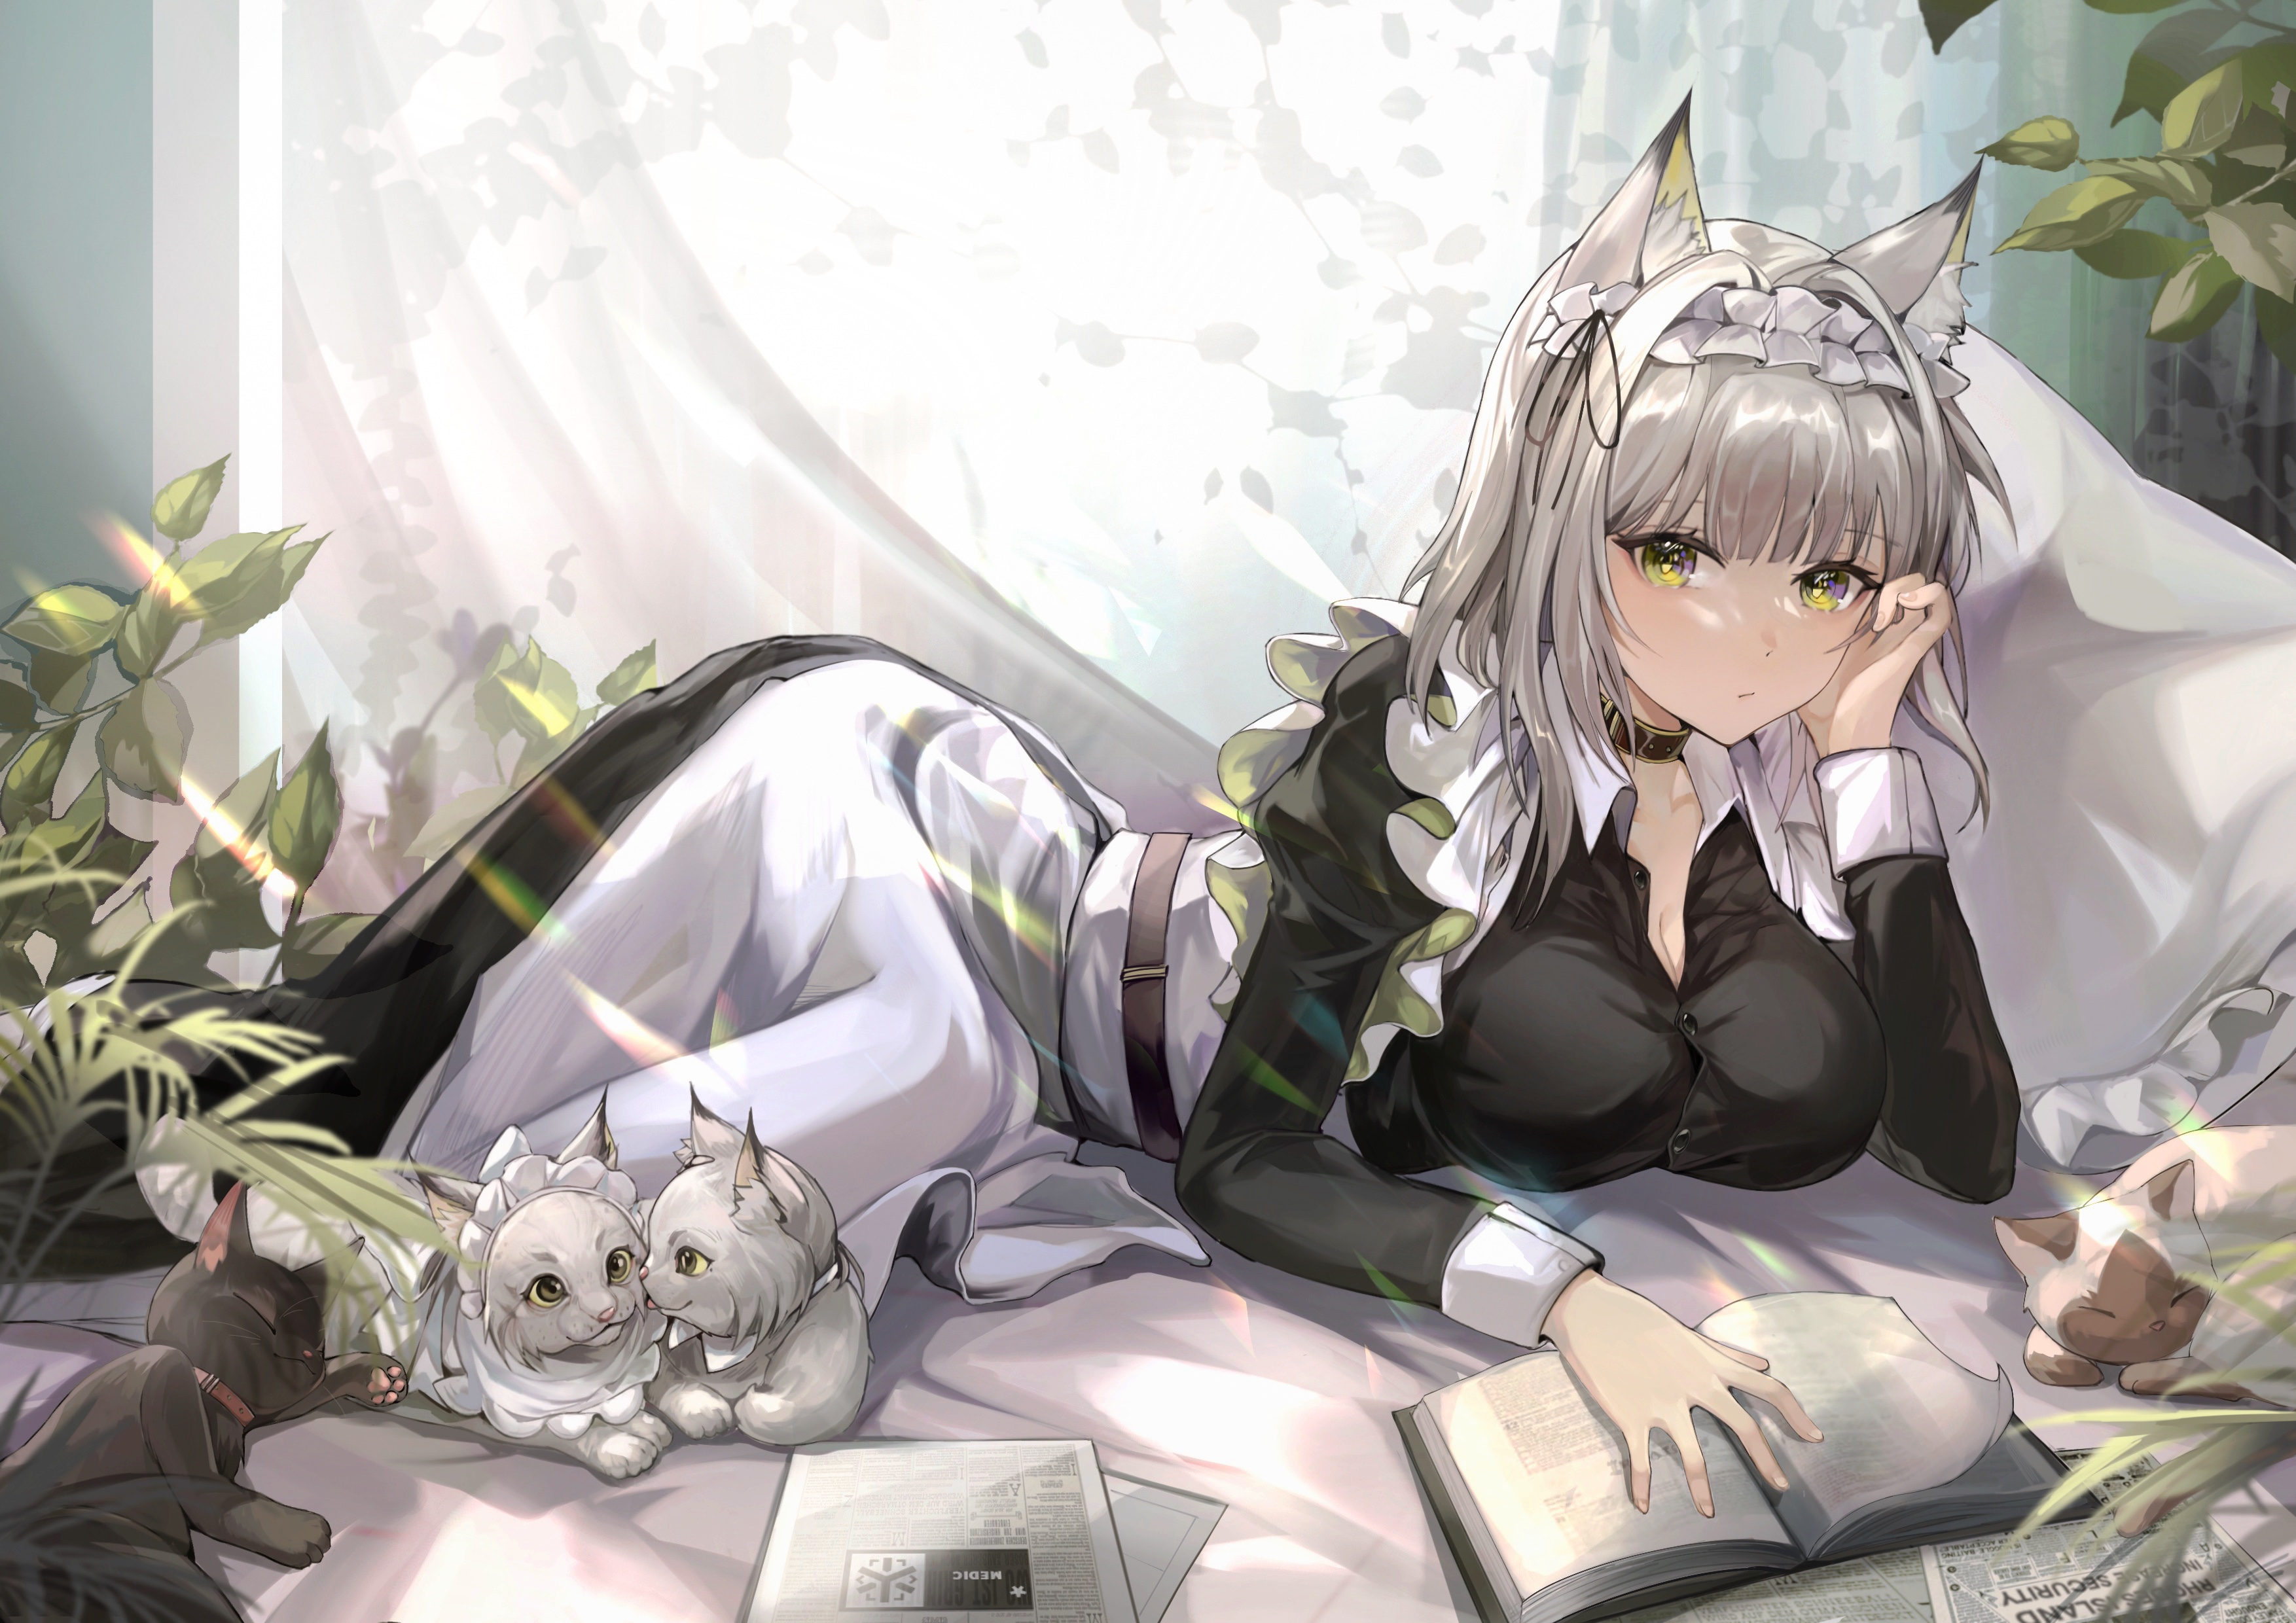 Anime Anime Girls Arknights Kal 039 Tsit Arknights Animal Ears Silver Hair Green Eyes Maid Outfit In 3508x2480